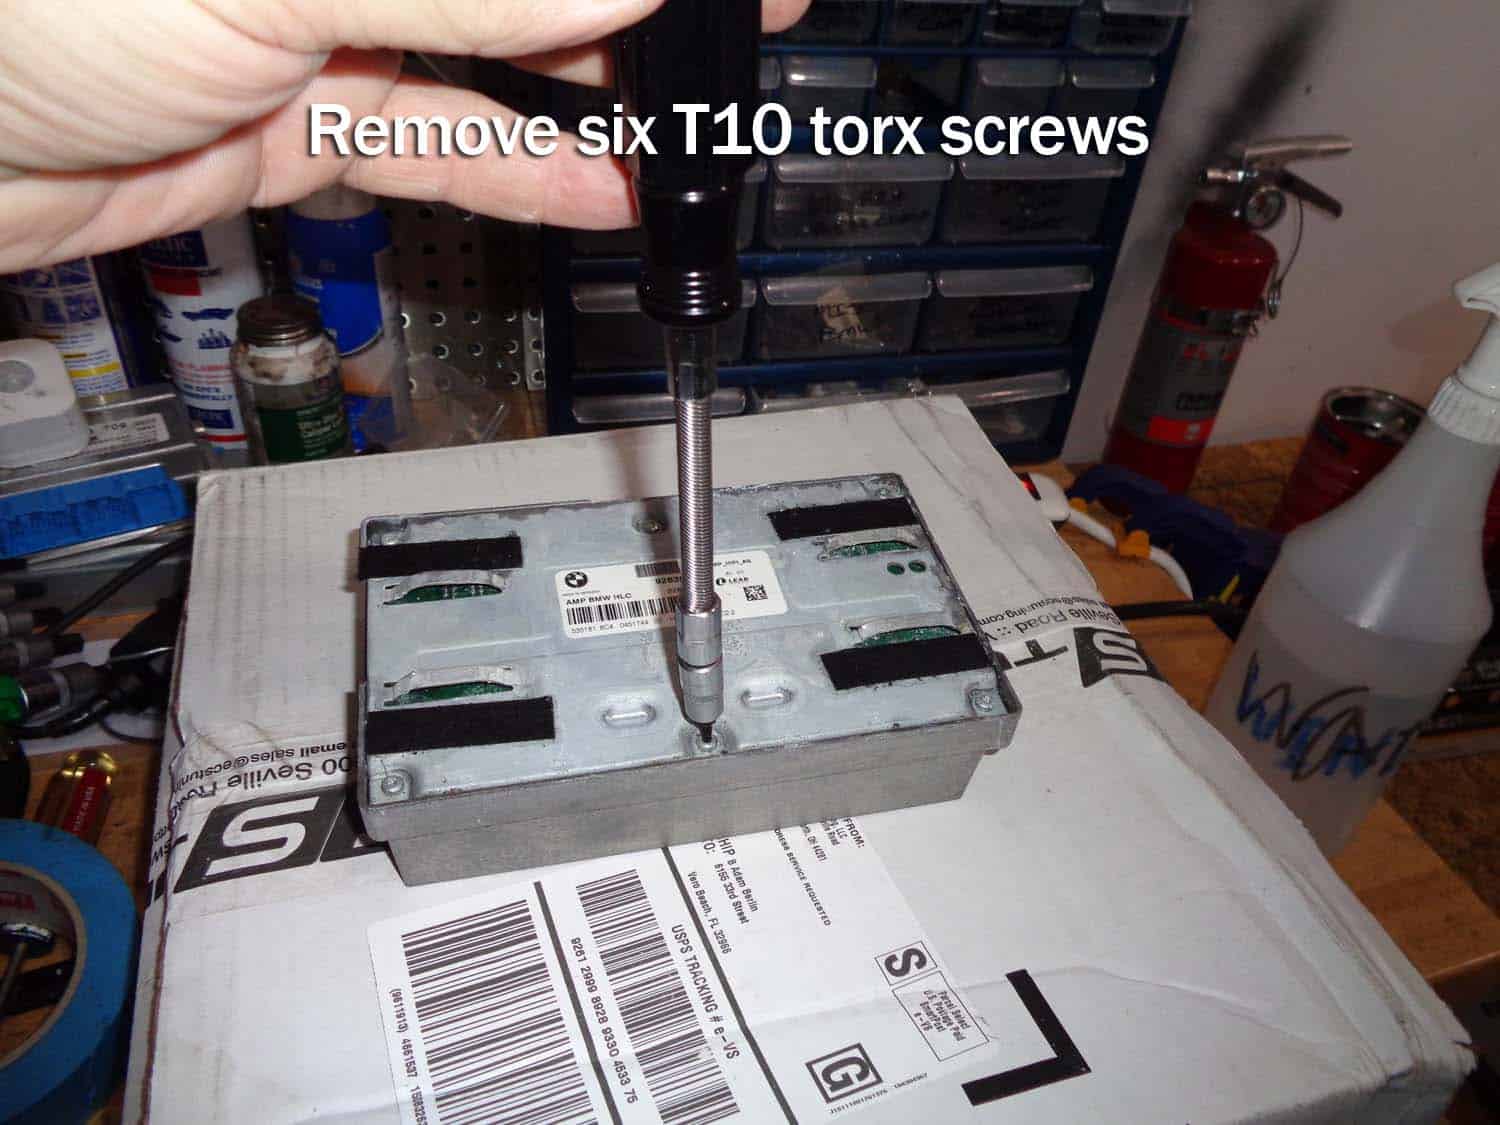 Remove the torx screws from bottom of amp